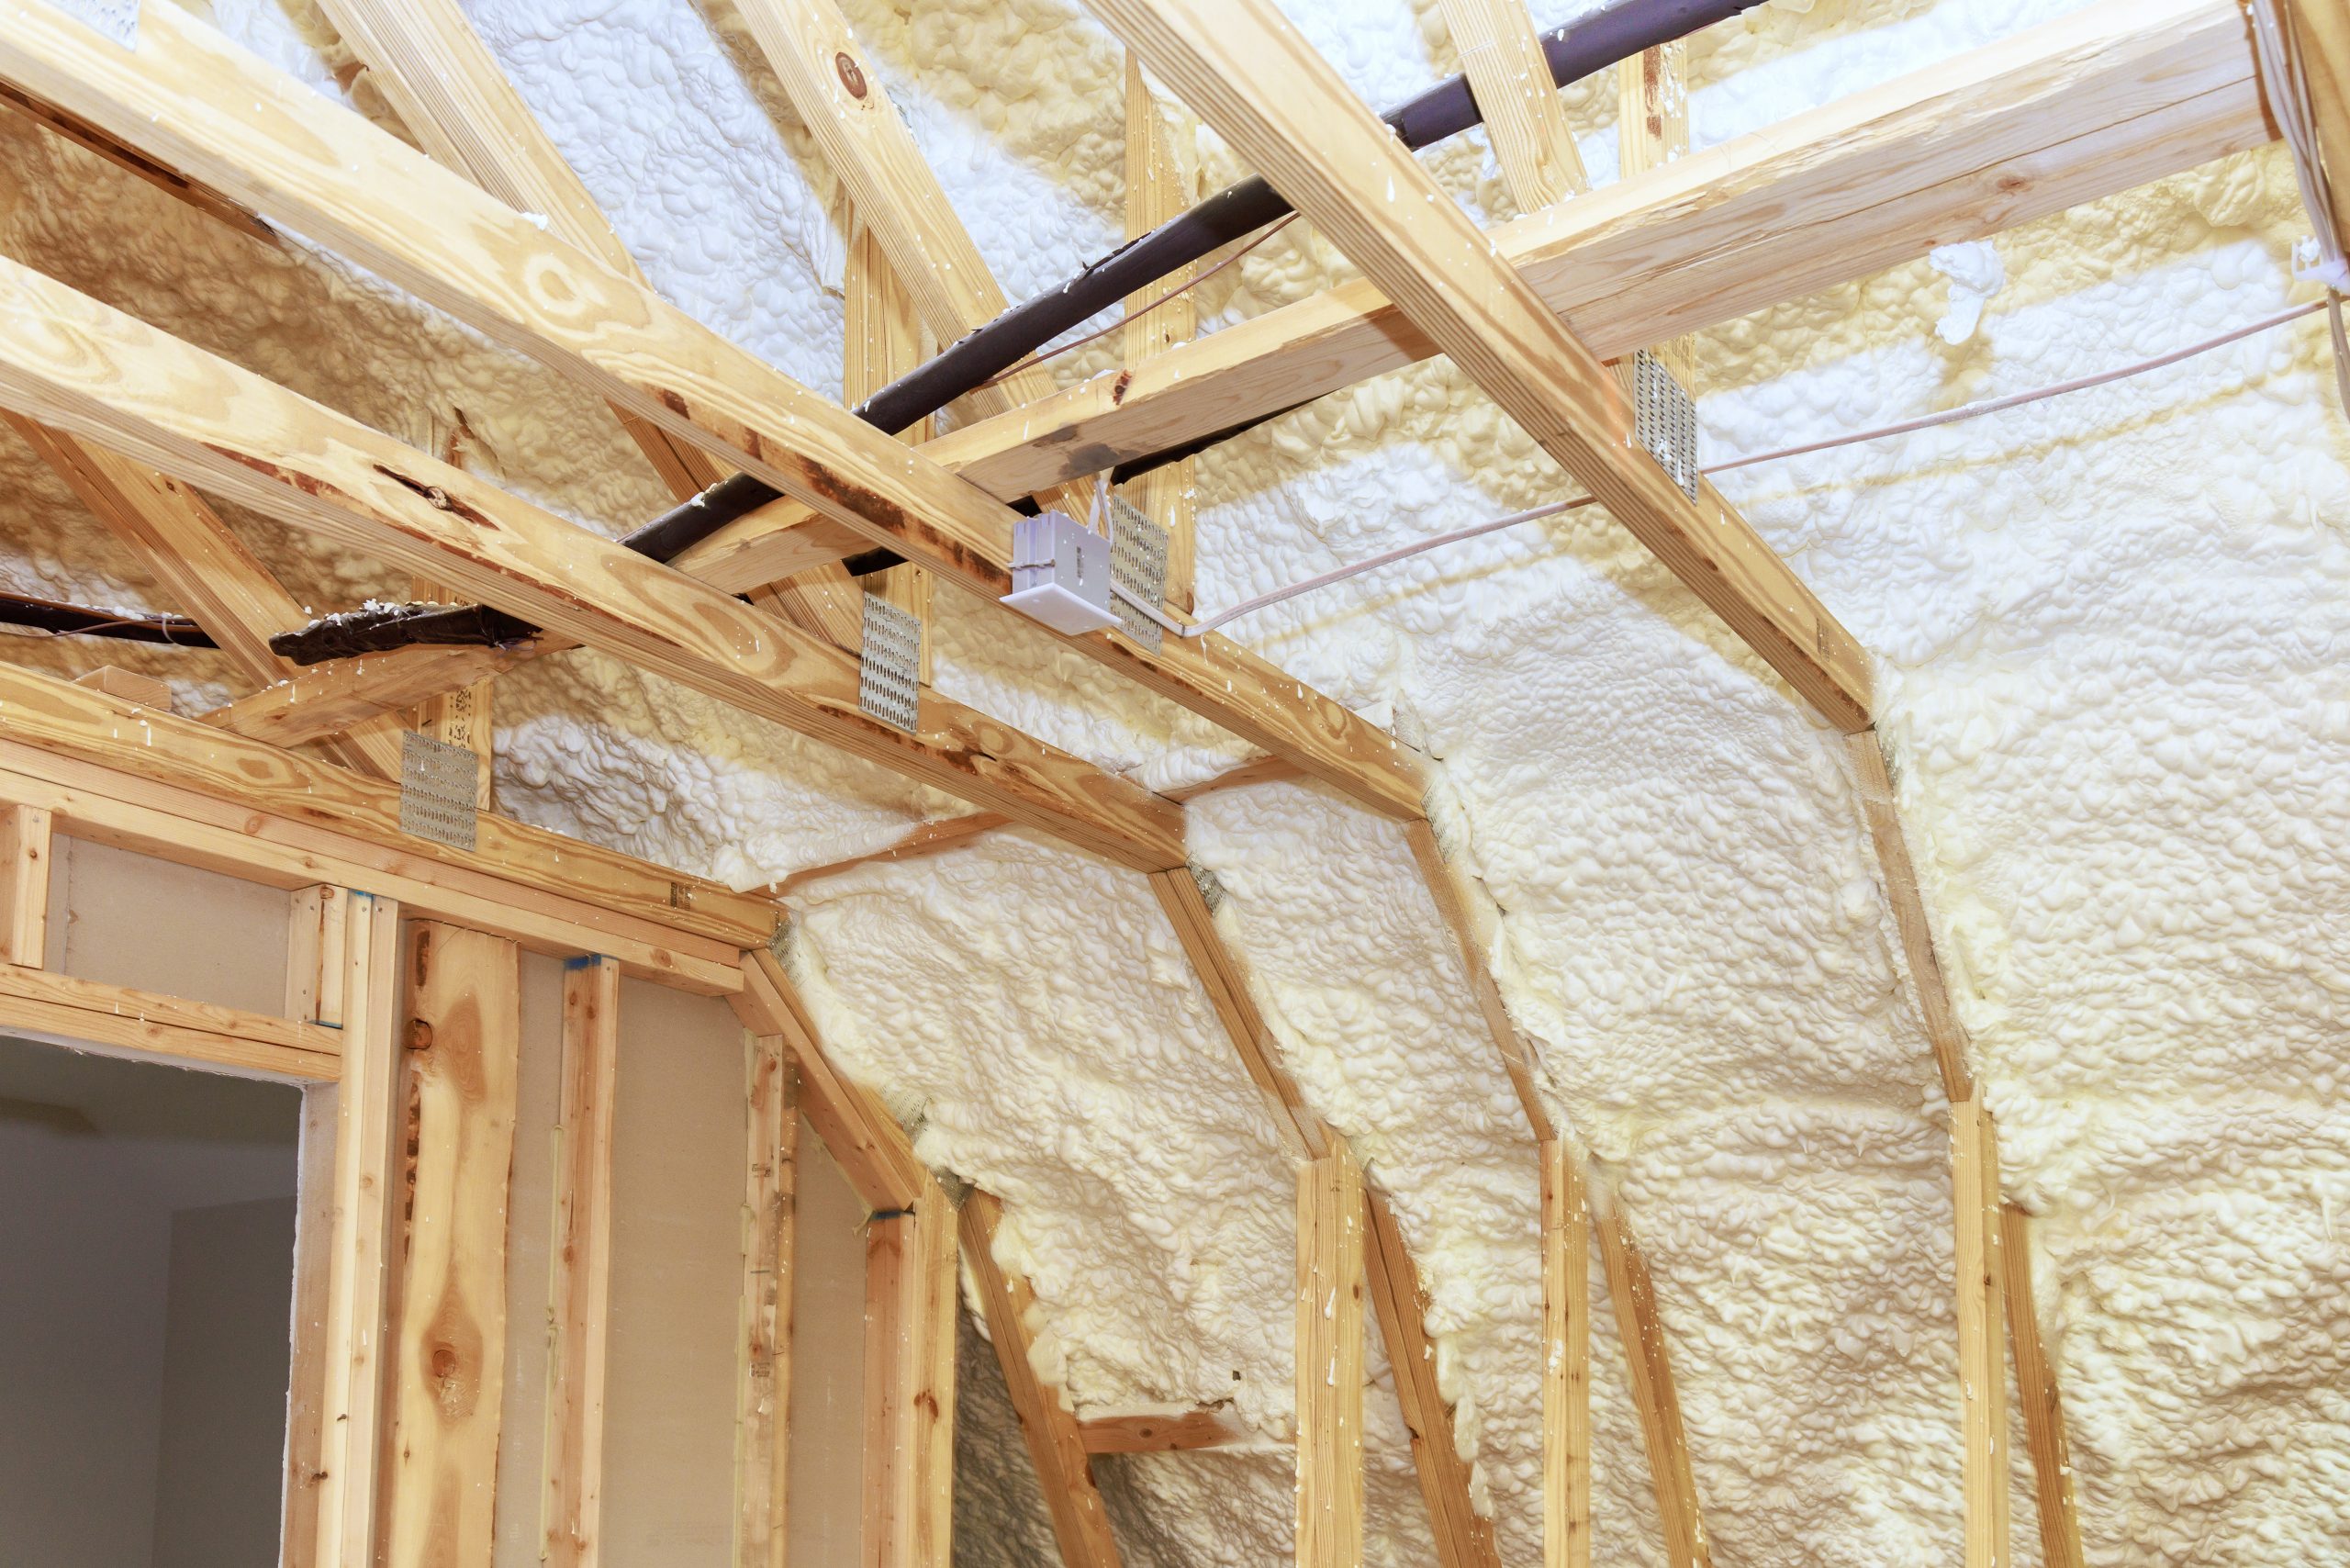 This is a picture for a blog about spray foam insulation contractor for more than just insulation.